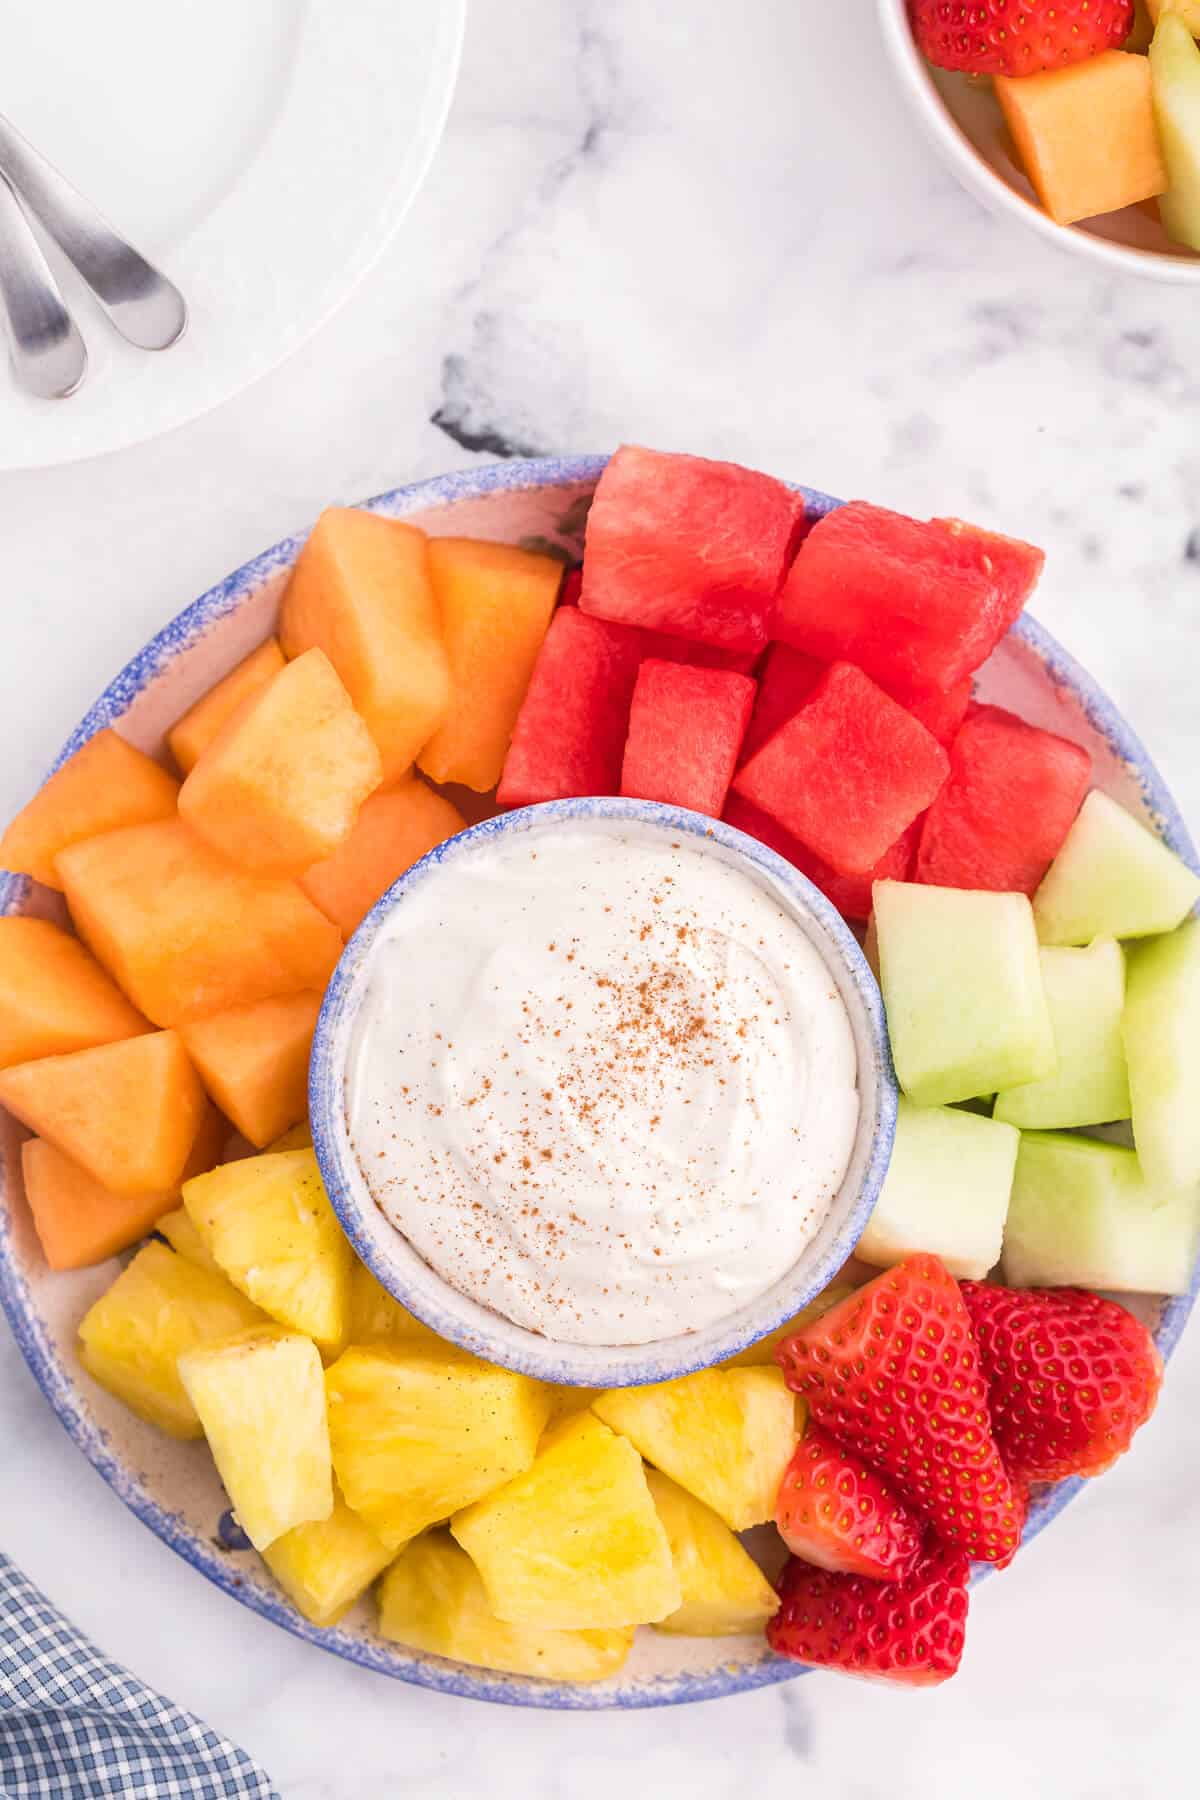 Cinnamon Cream Cheese Dip - Only four ingredients in this simple fruit dip. It's super easy to whip up and can be made the night before and kept in the fridge. Try with fruit, cookies or sweet crackers.